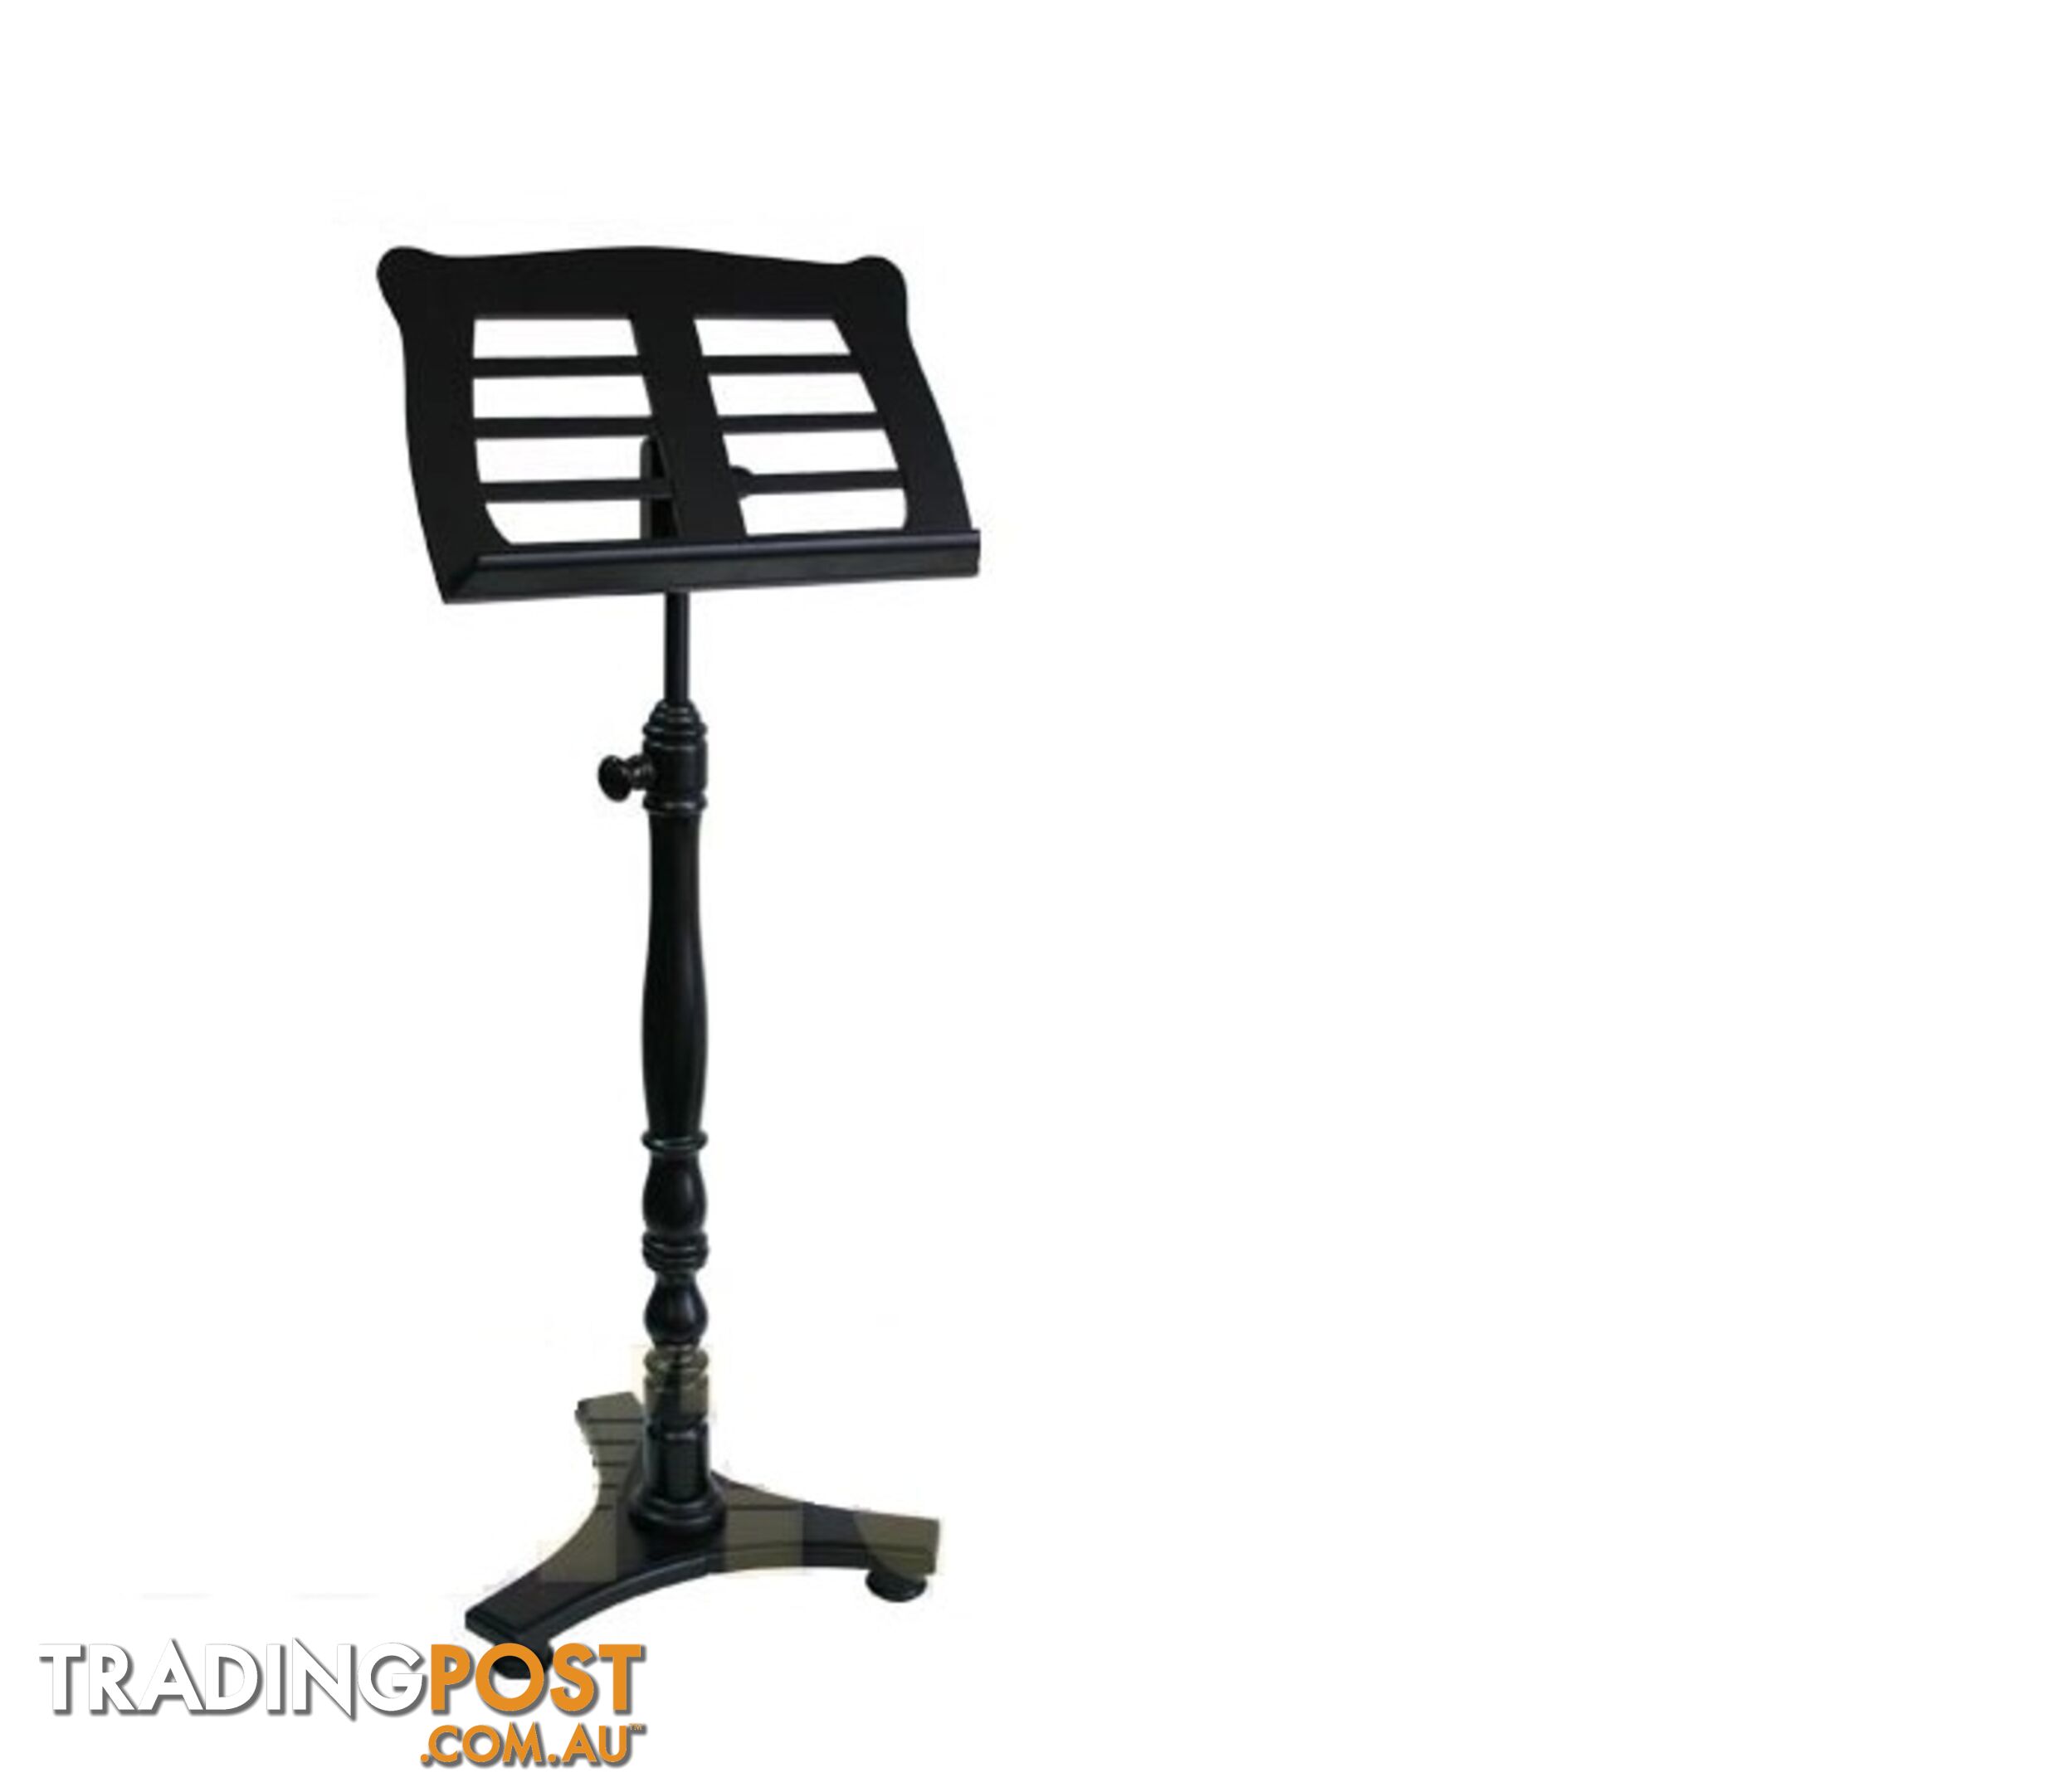 Black Wooden Music Stand  